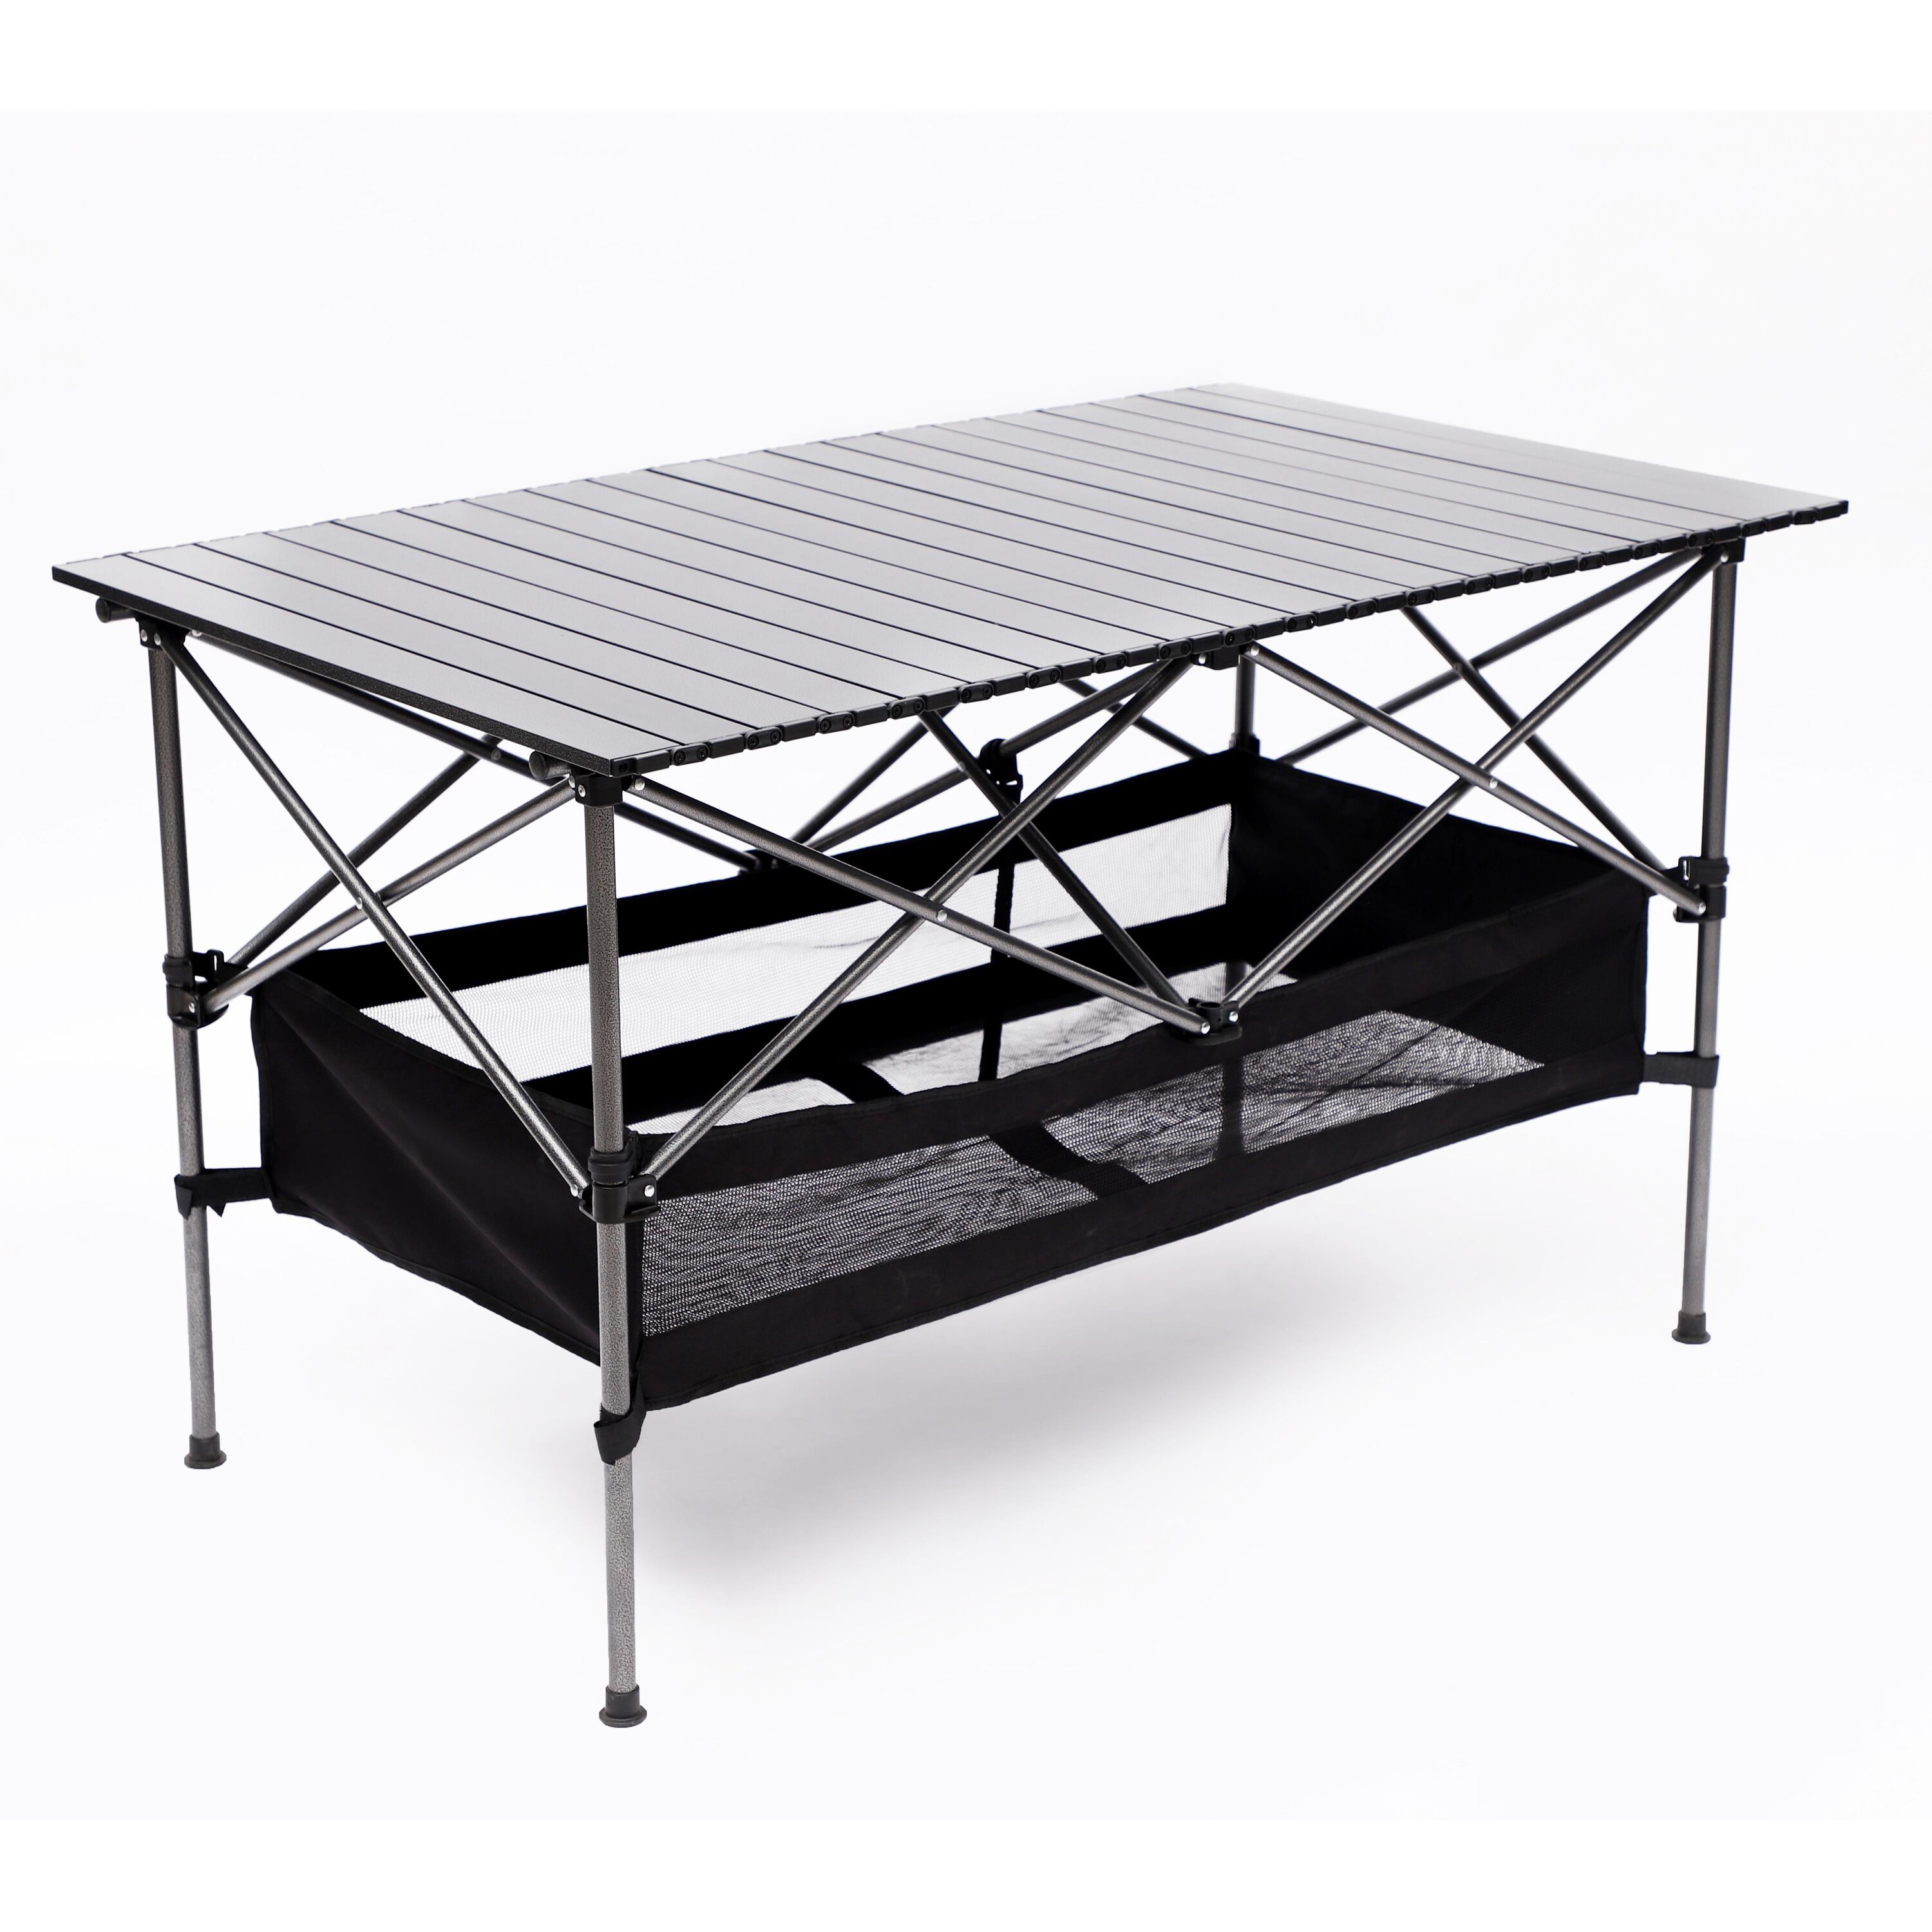 Outsunny Outsunny 48 Aluminum Folding Camping Table With Carrying